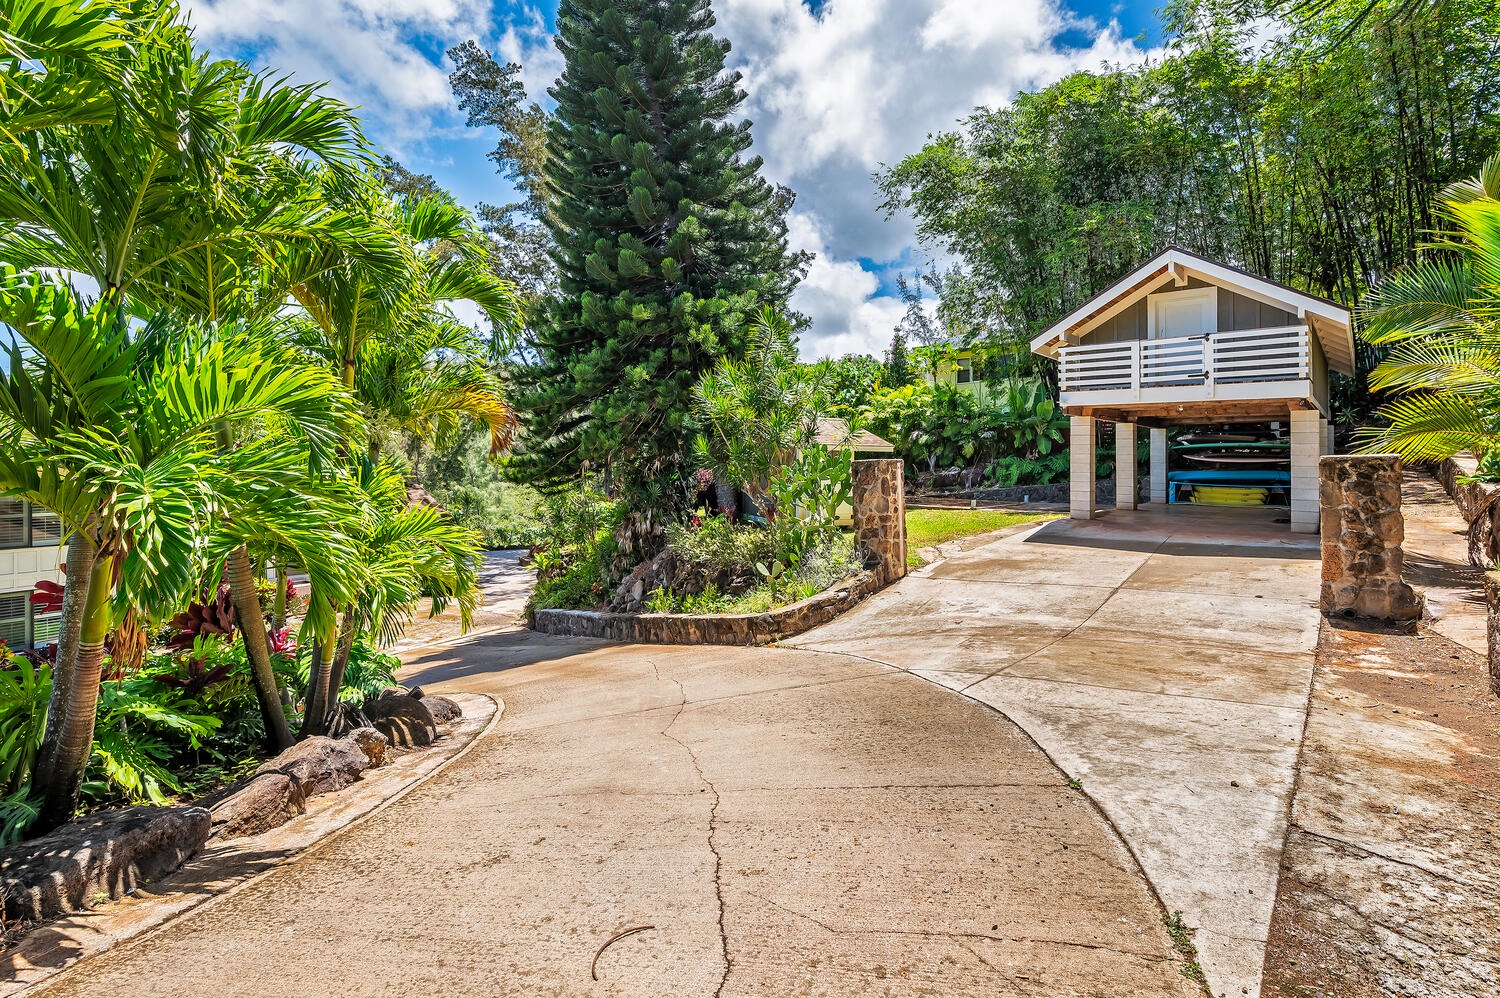 Haleiwa Vacation Rentals, Mele Makana - Head up the driveway to the covered carport